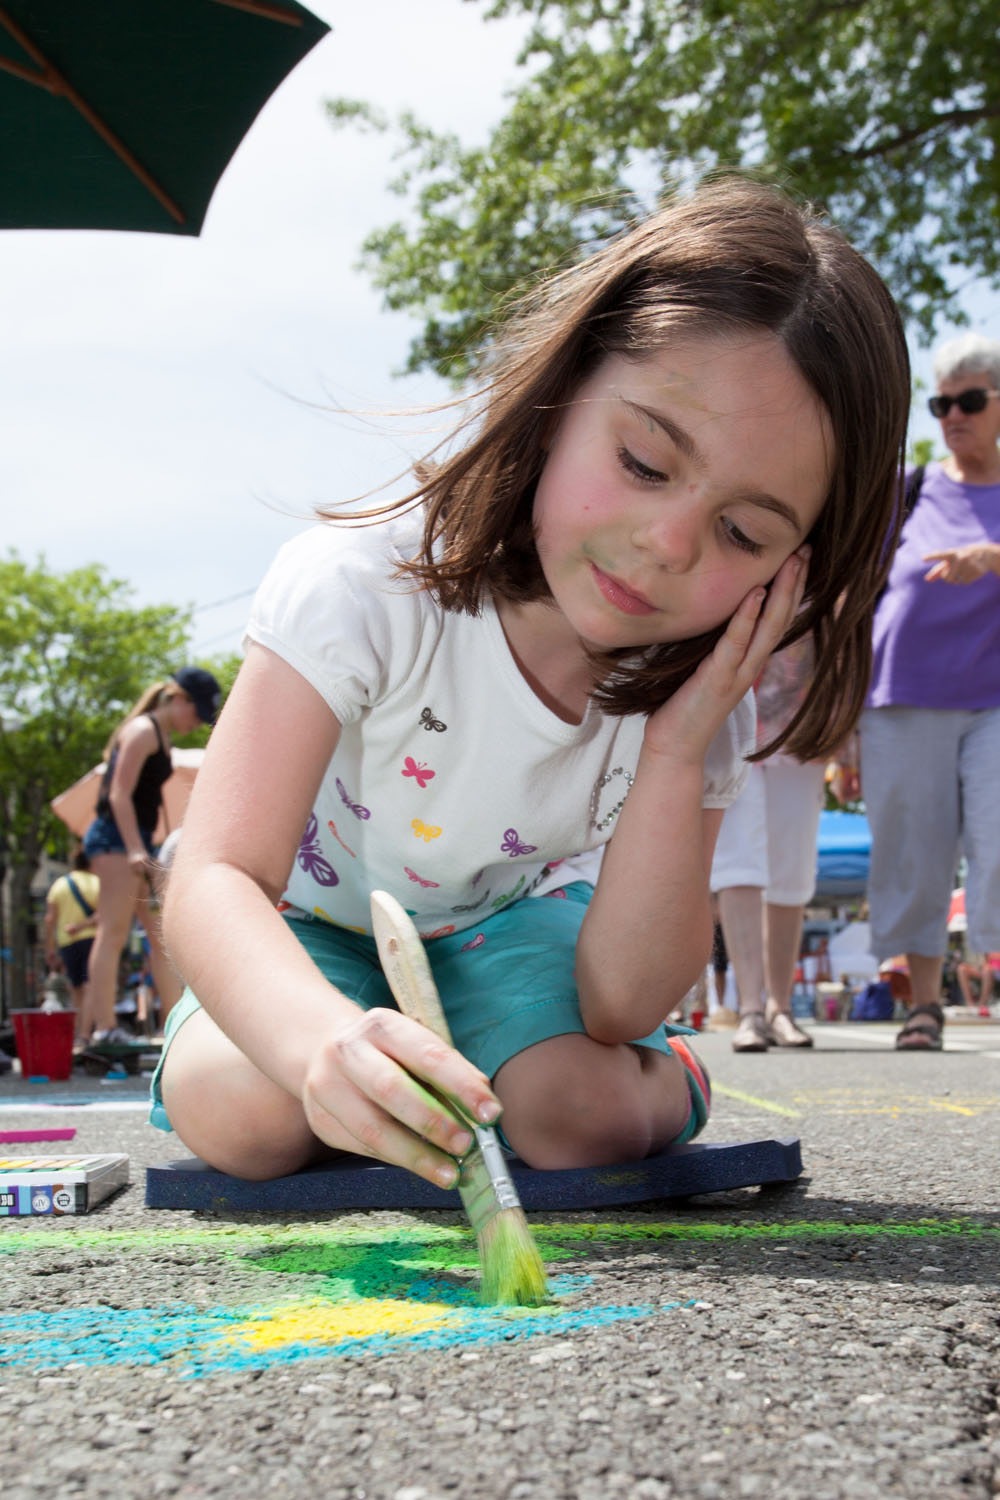 Cassidy Masarik, 6, of Manorville, works on her flower painting.